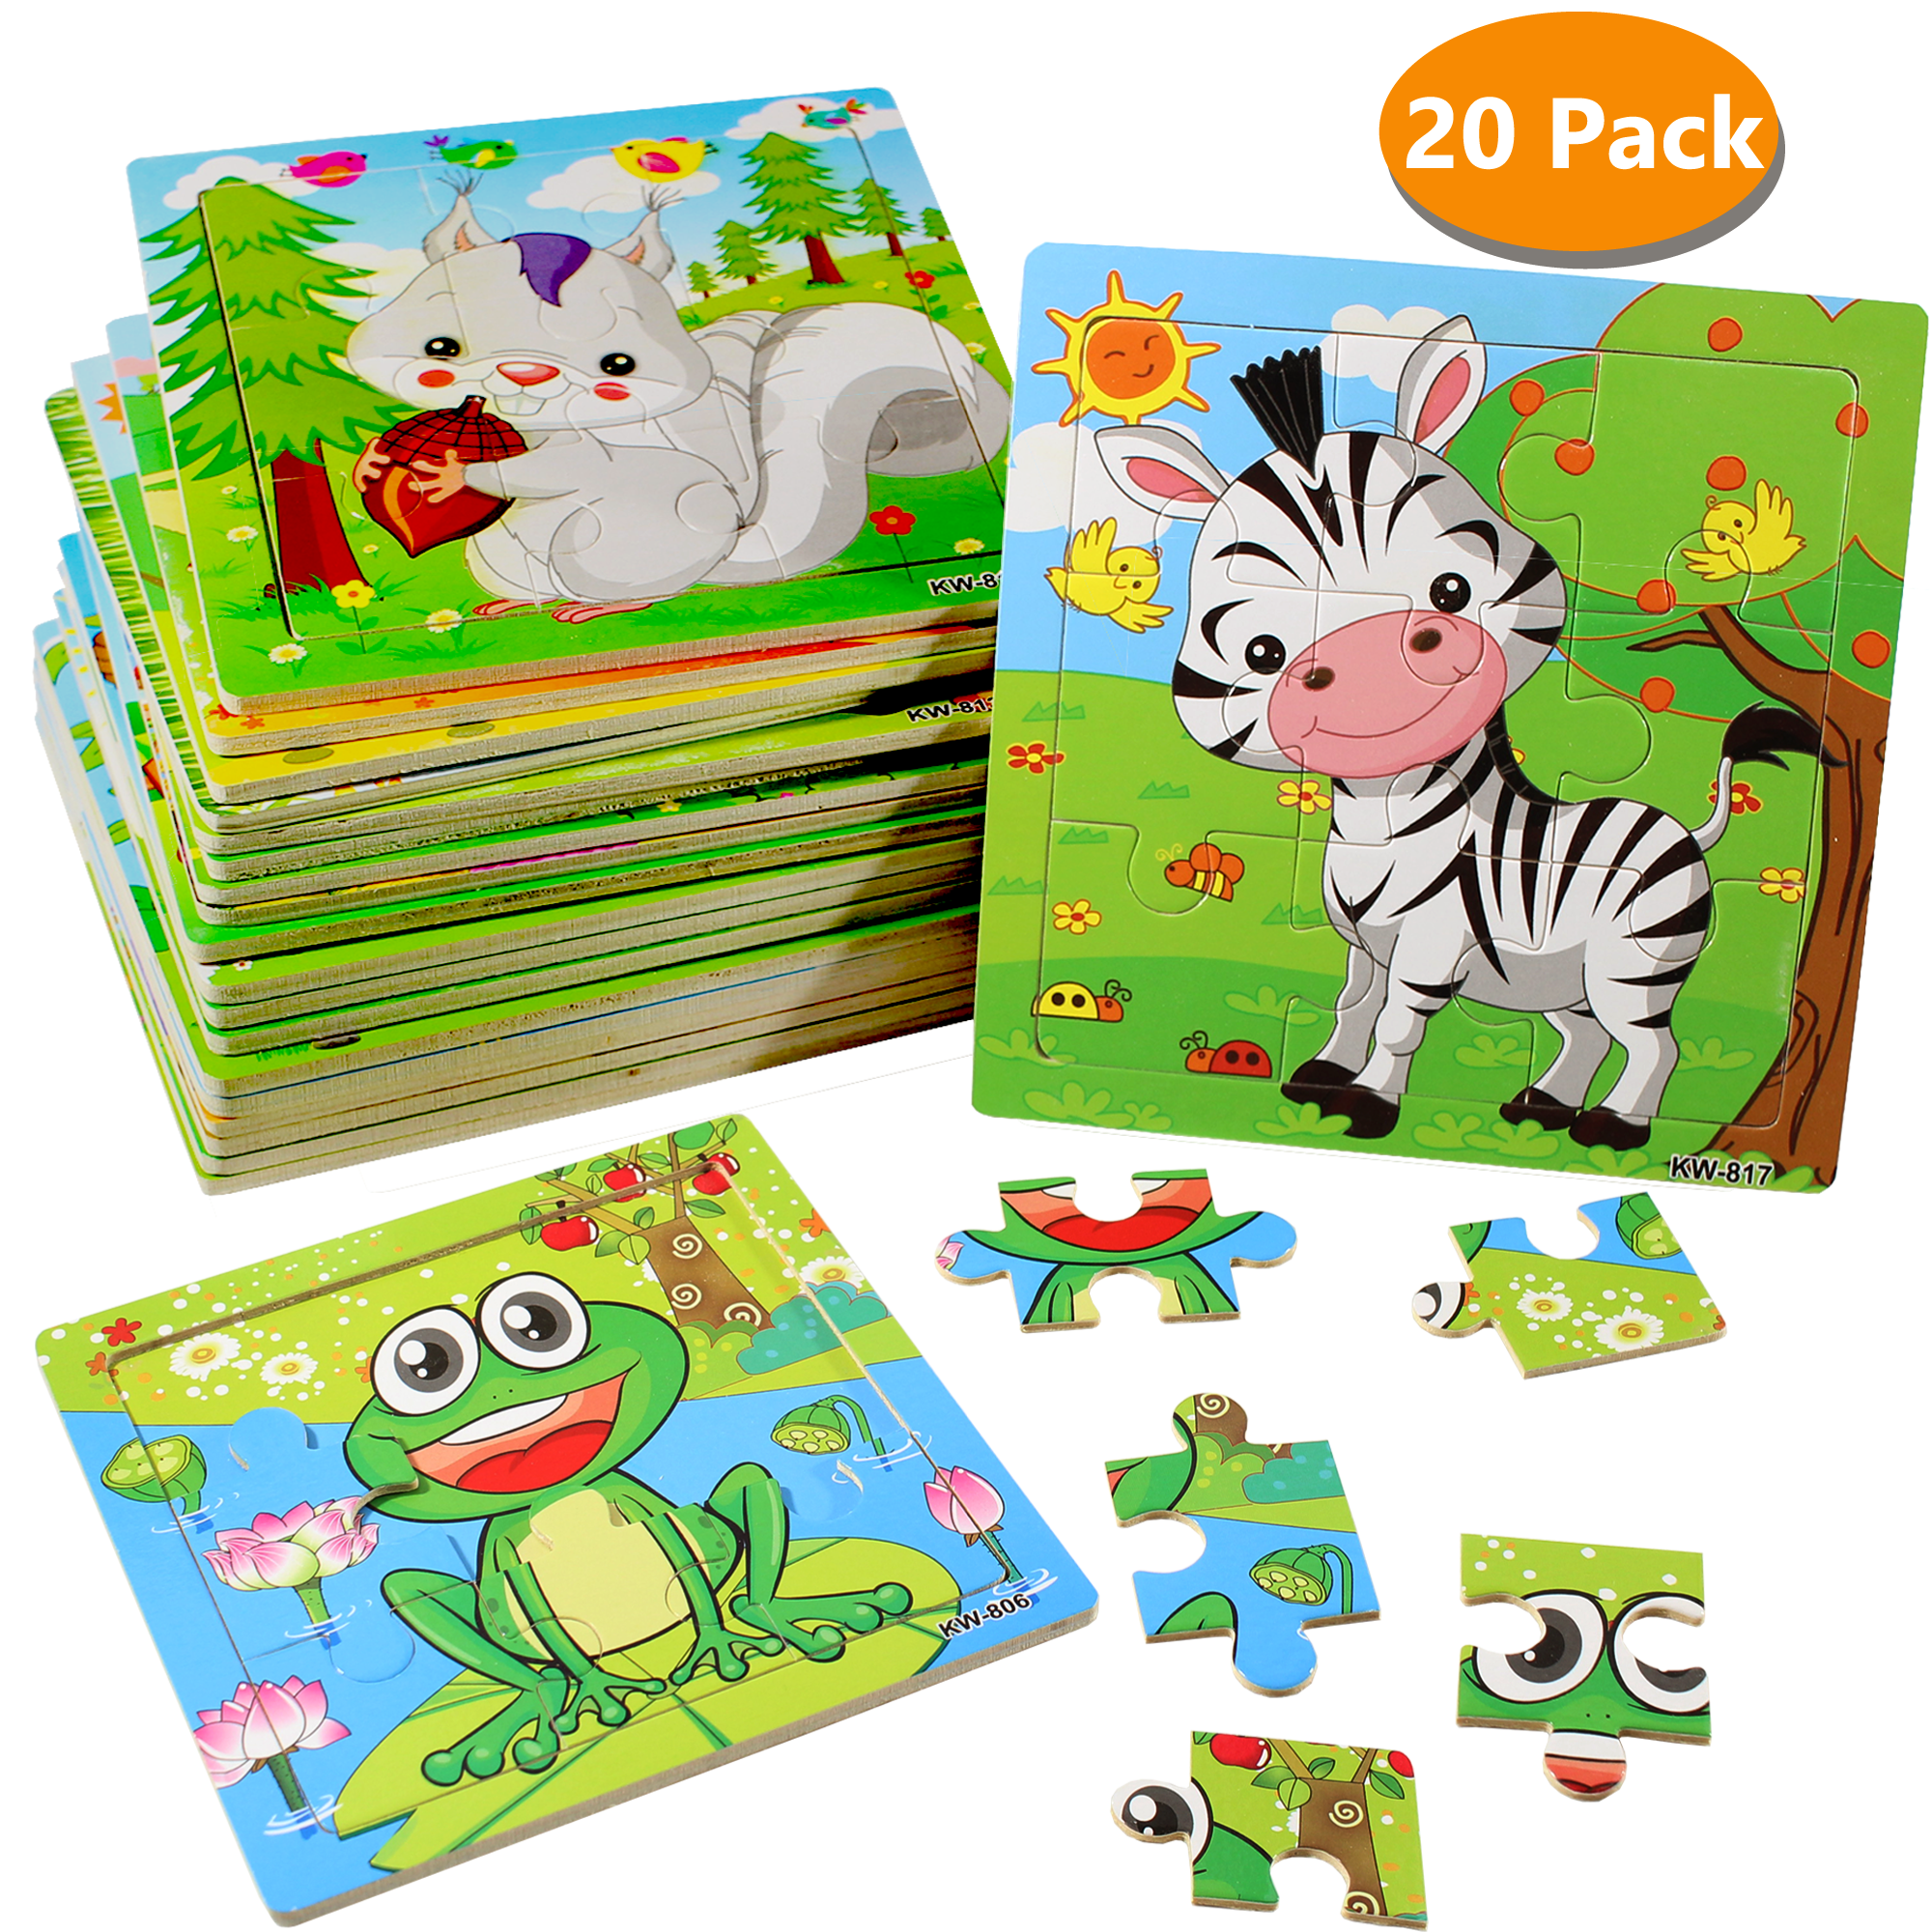 20 Pack Wooden Jigsaw Puzzles for Kids Ages 2-5 Toddler Puzzles 9 Pieces  Preschool Educational Learning Toys Set Animals Puzzles for 2 3 4 Years Old  ...